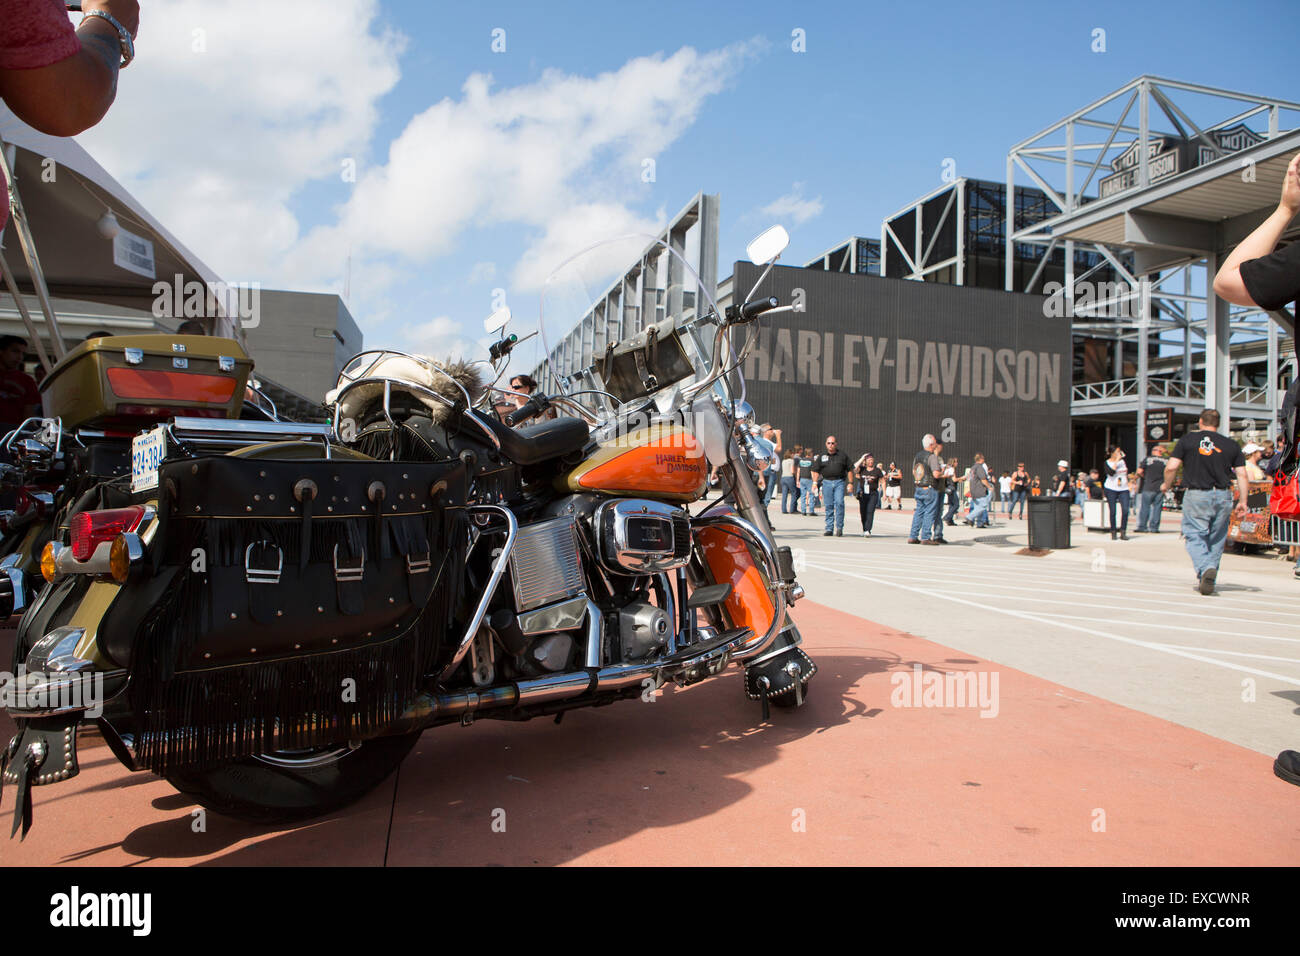 Harley Davidson motorcycles during a Harley rally at the Harley Davidson Museum in Milwaukee, Wisconsin Stock Photo